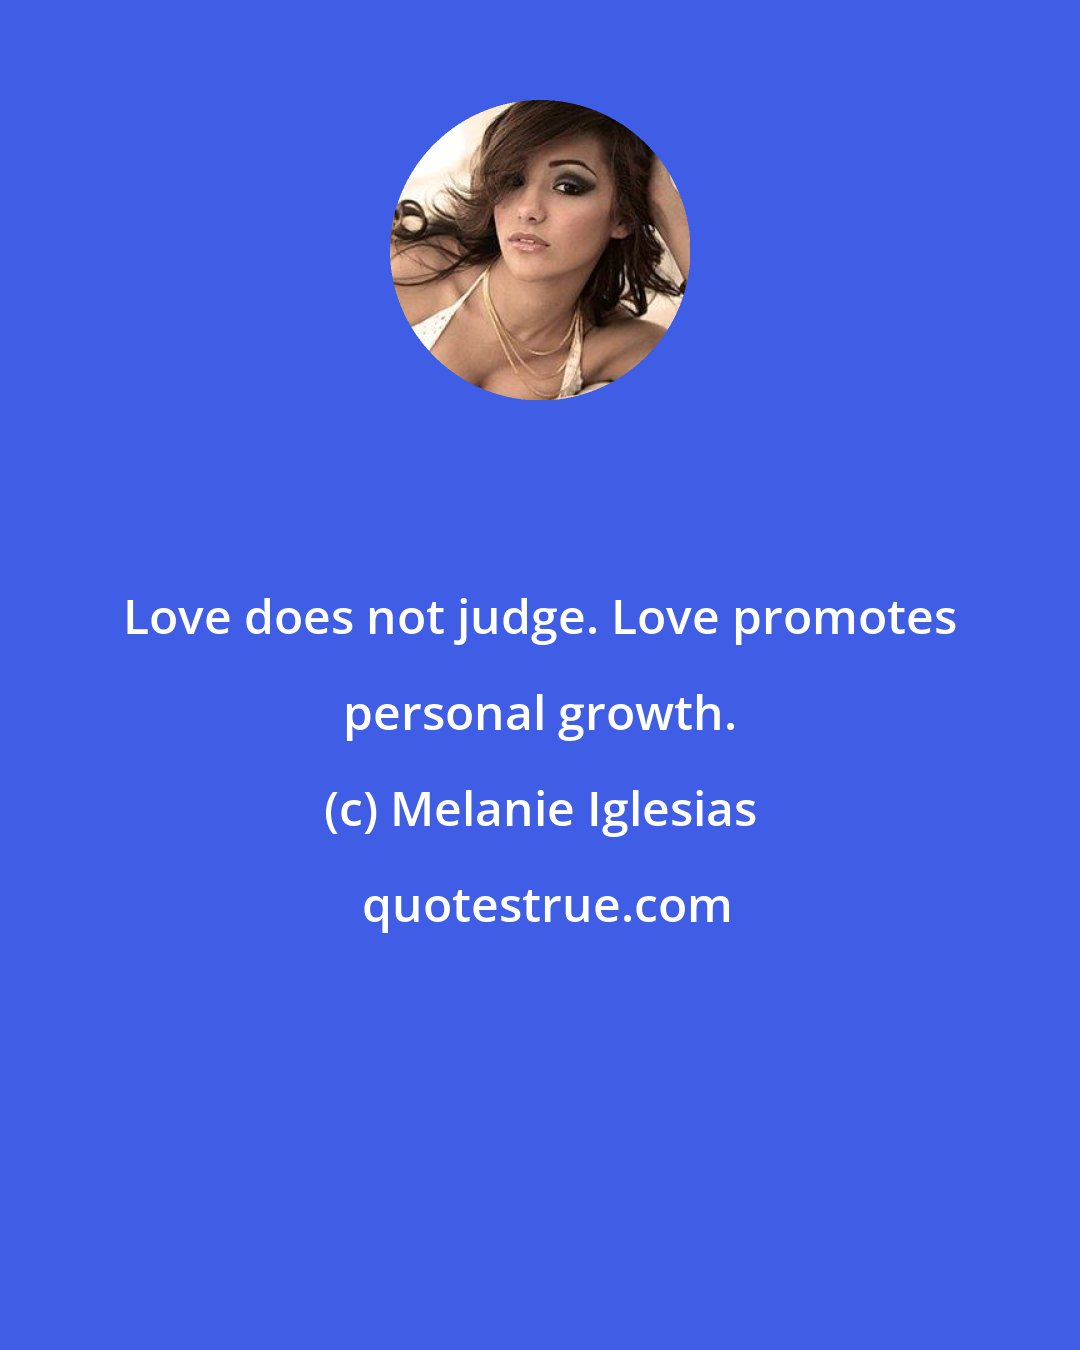 Melanie Iglesias: Love does not judge. Love promotes personal growth.